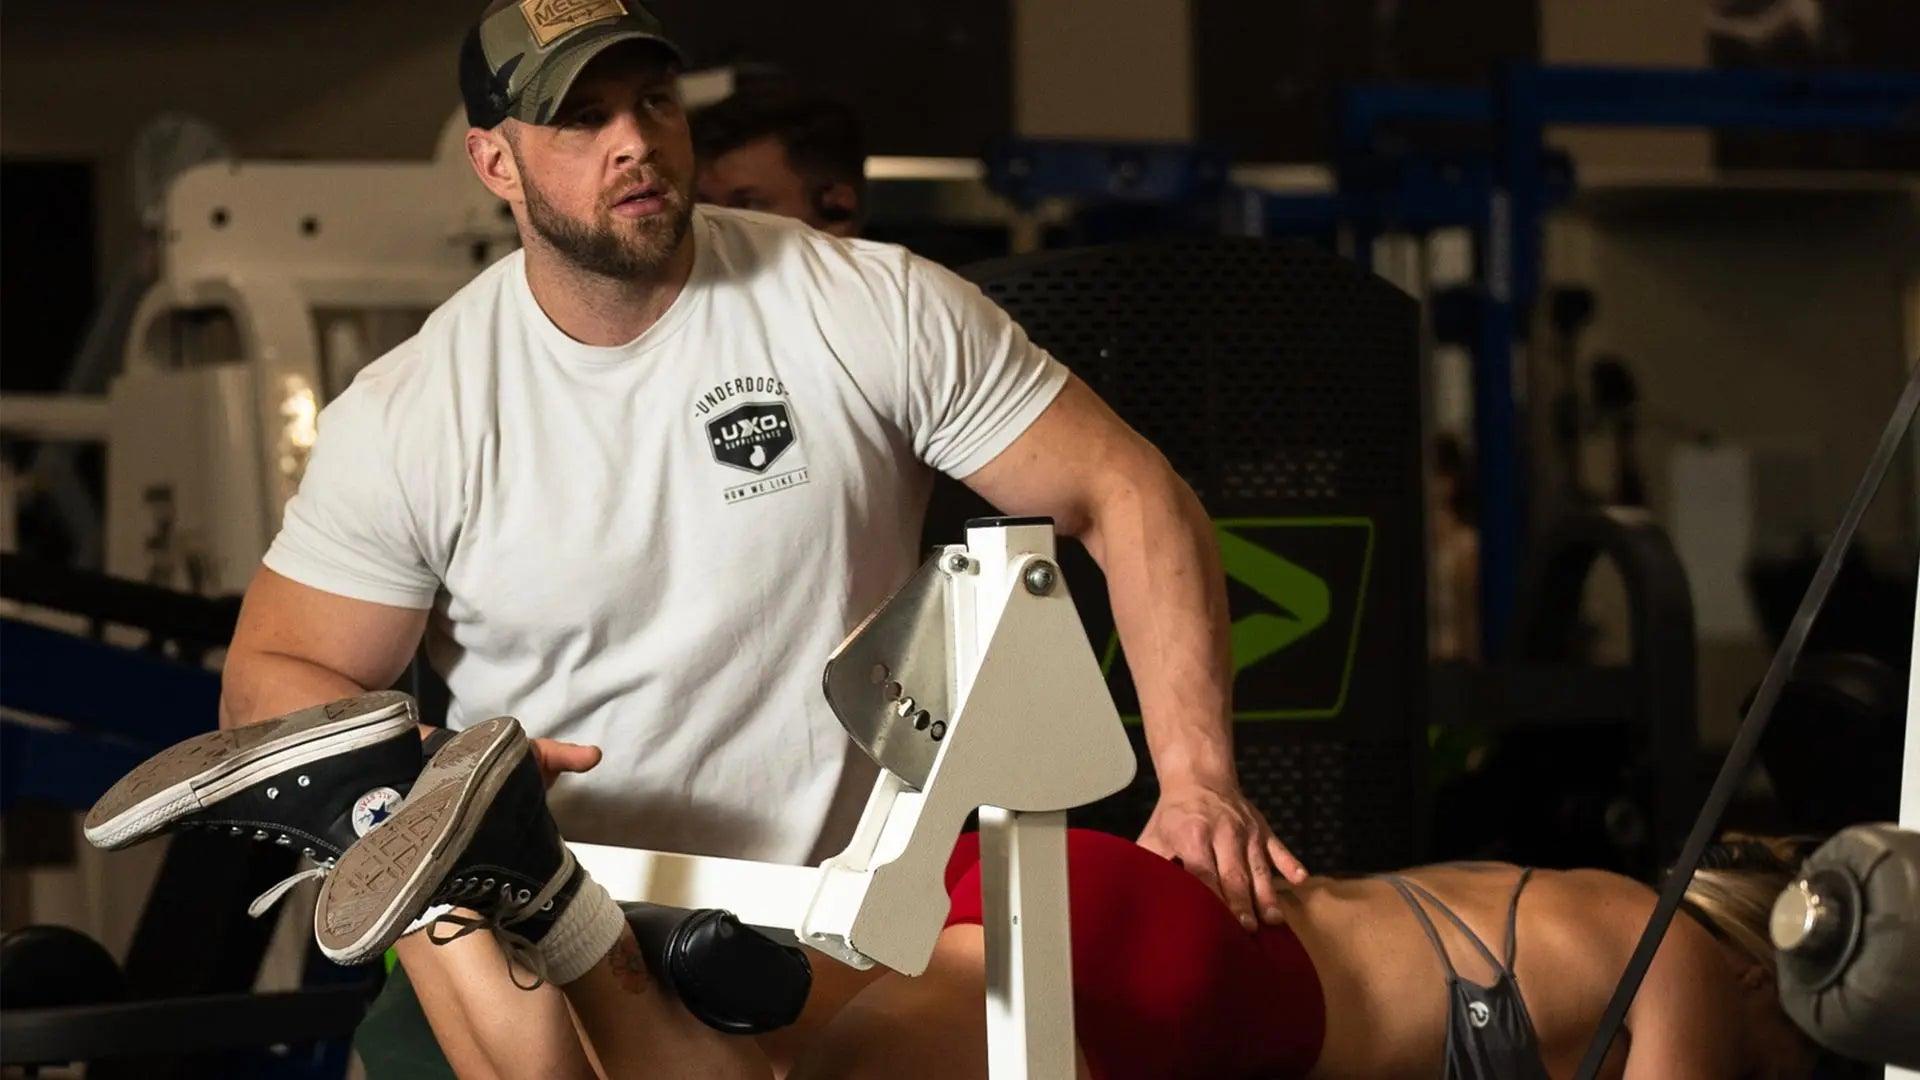 Seated-Hamstrings-For-More-Size UXO Supplements